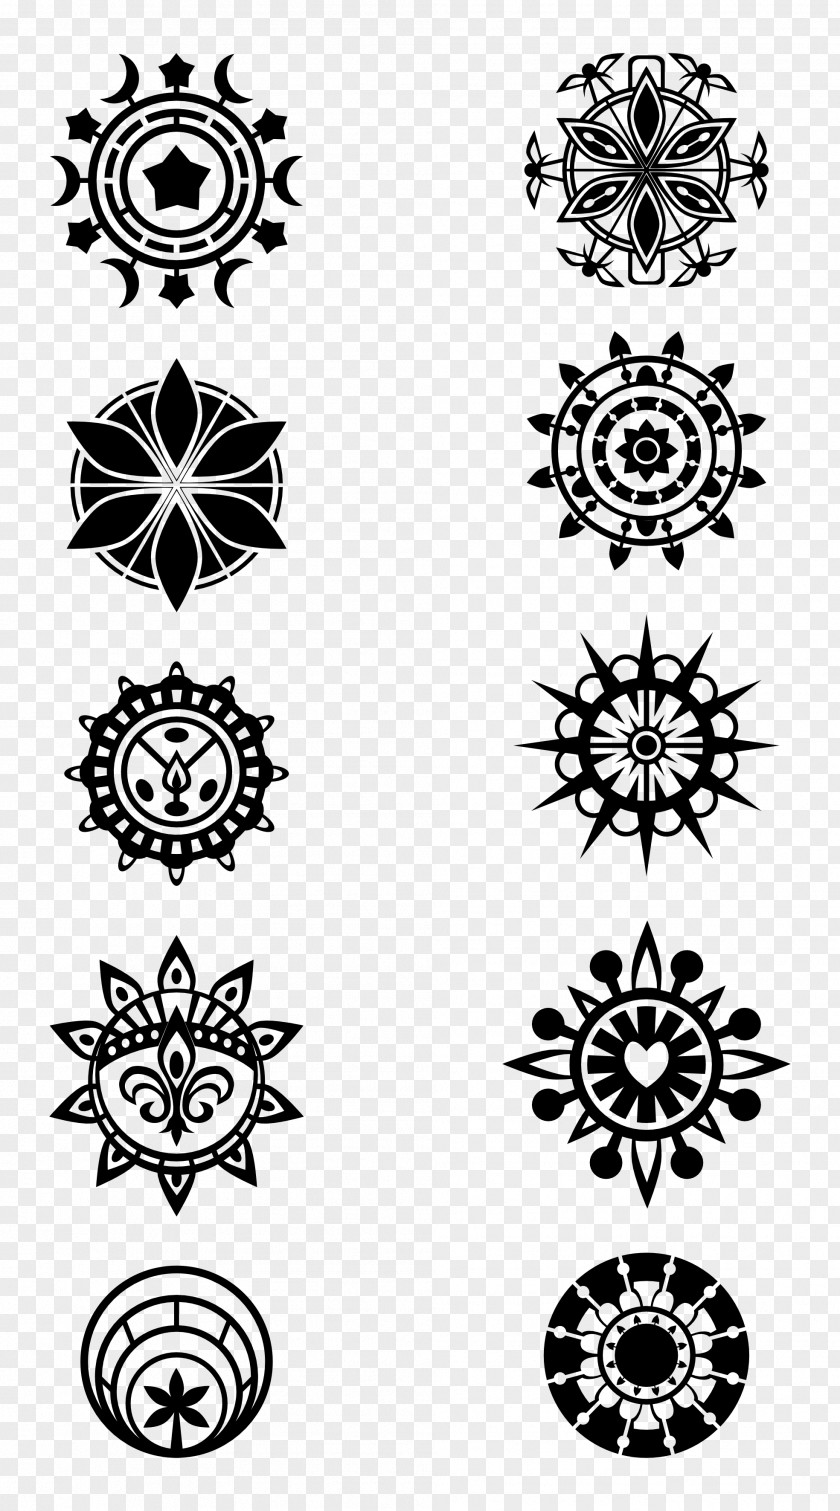 Circle Image Flower Vector Graphics PNG